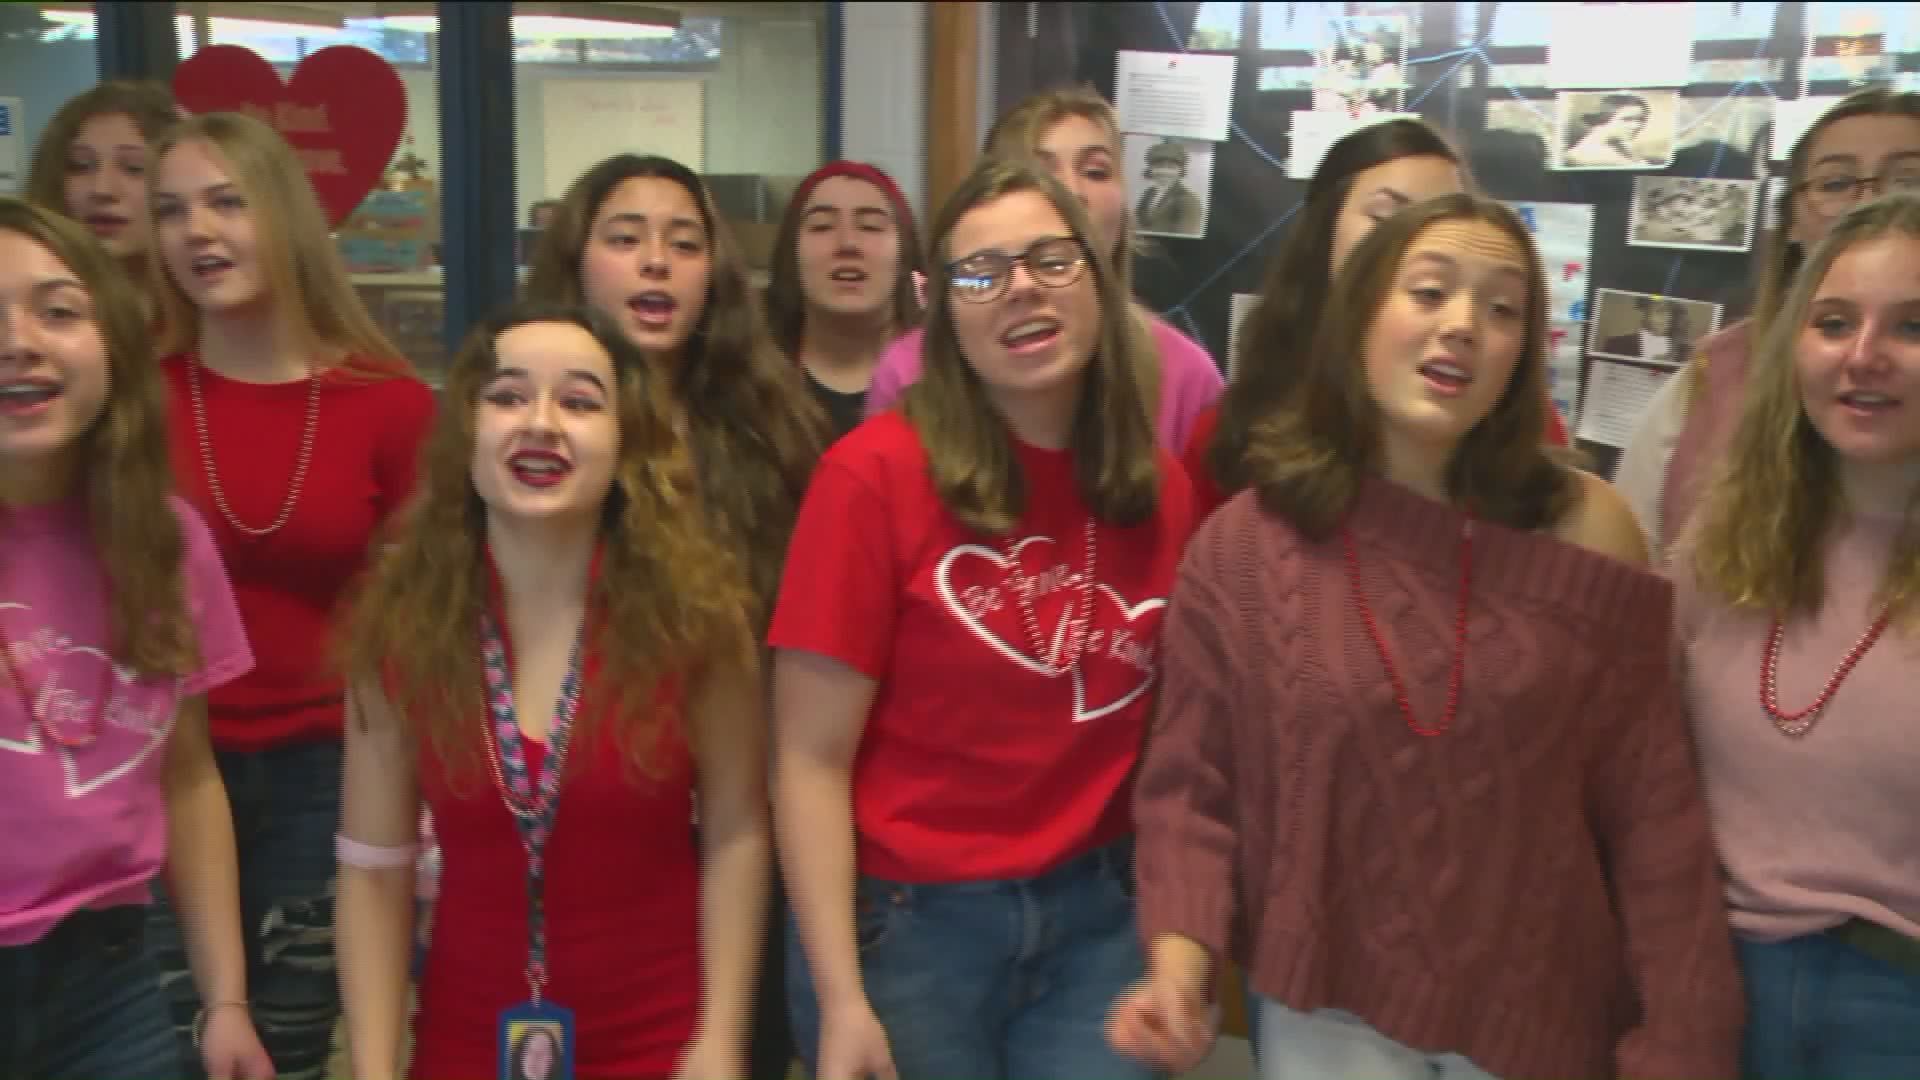 Valentine’s Day is taking on a deeper meaning for these students. They are honoring their classmate Jenna Foltz after she passed away during heart surgery.